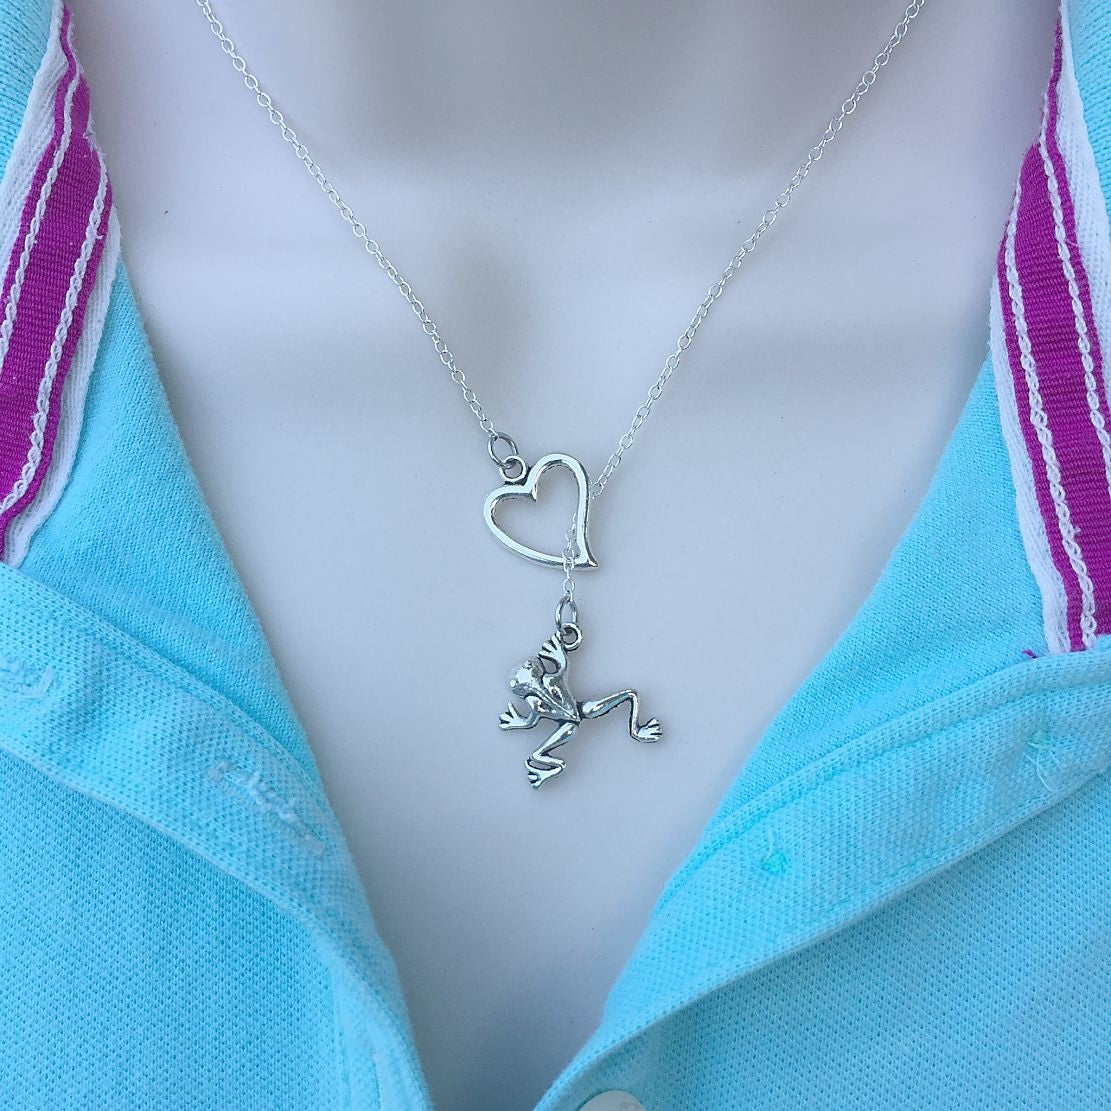 I Love Frog Handcrafted Silver Lariat Y Necklace.